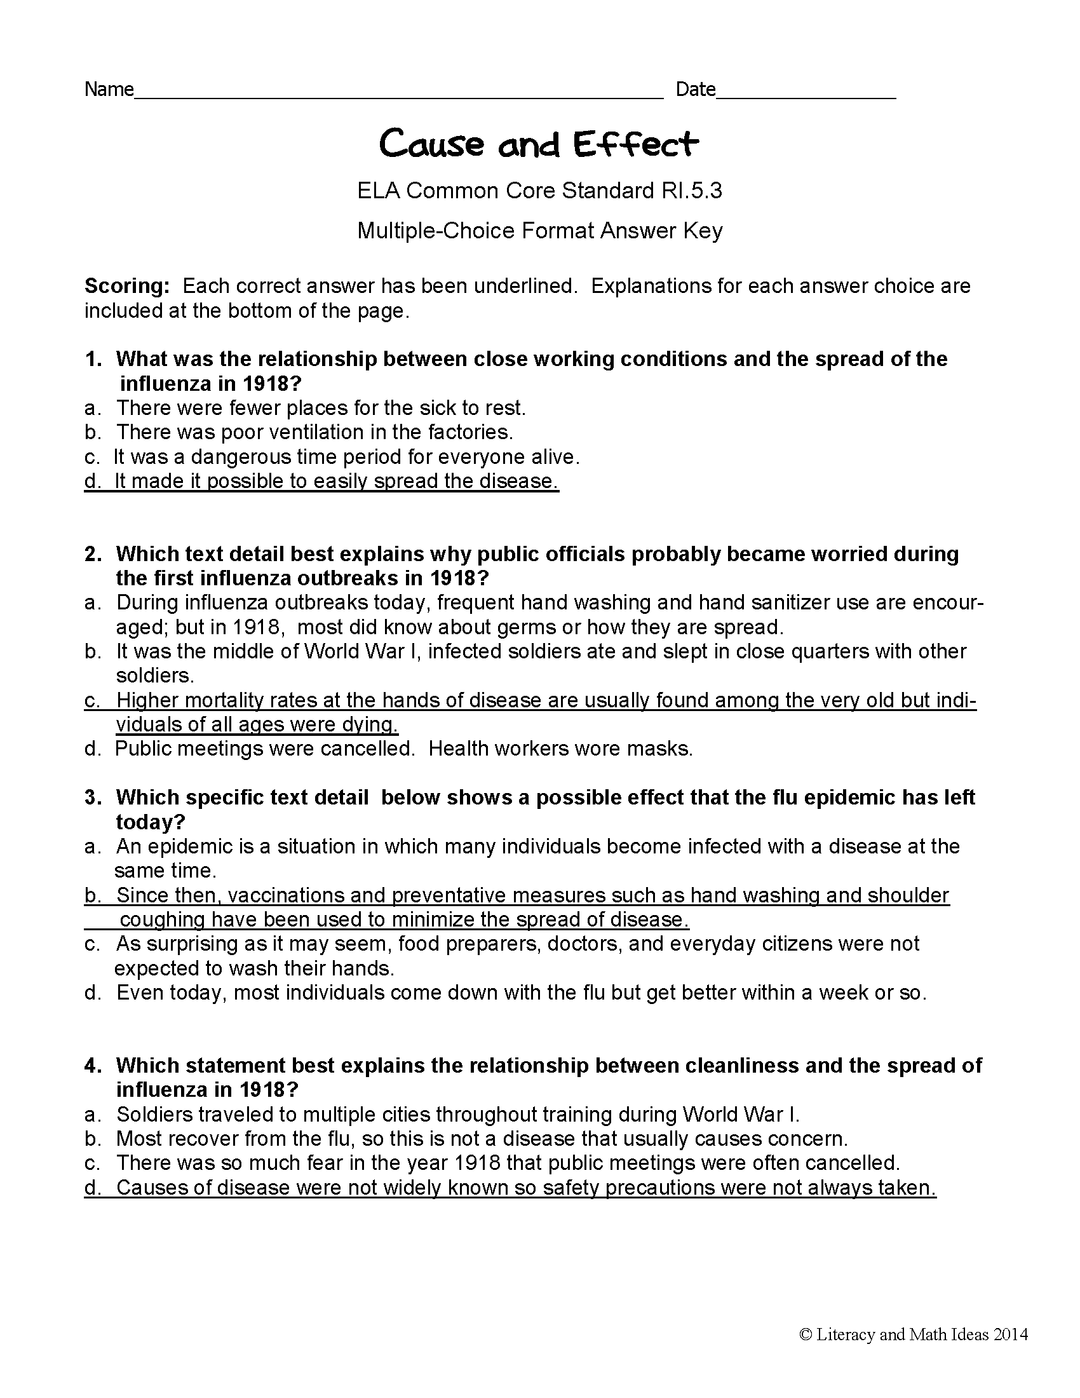 Grade 5 Common Core Assessments: Cause and Effect RI.5.3